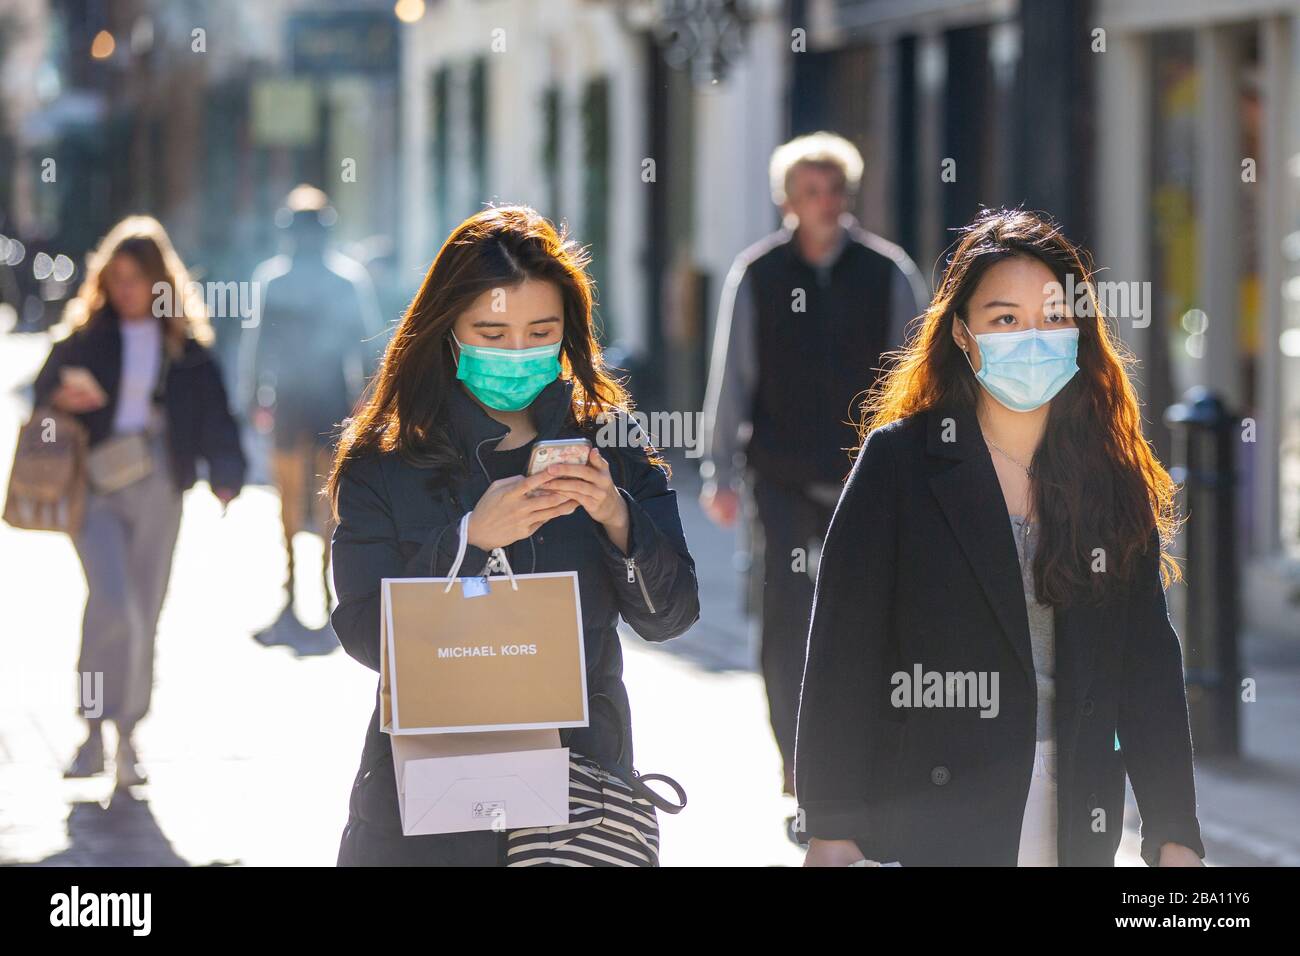 Shoppers in London's West End during the Corona virus pandemic Stock Photo